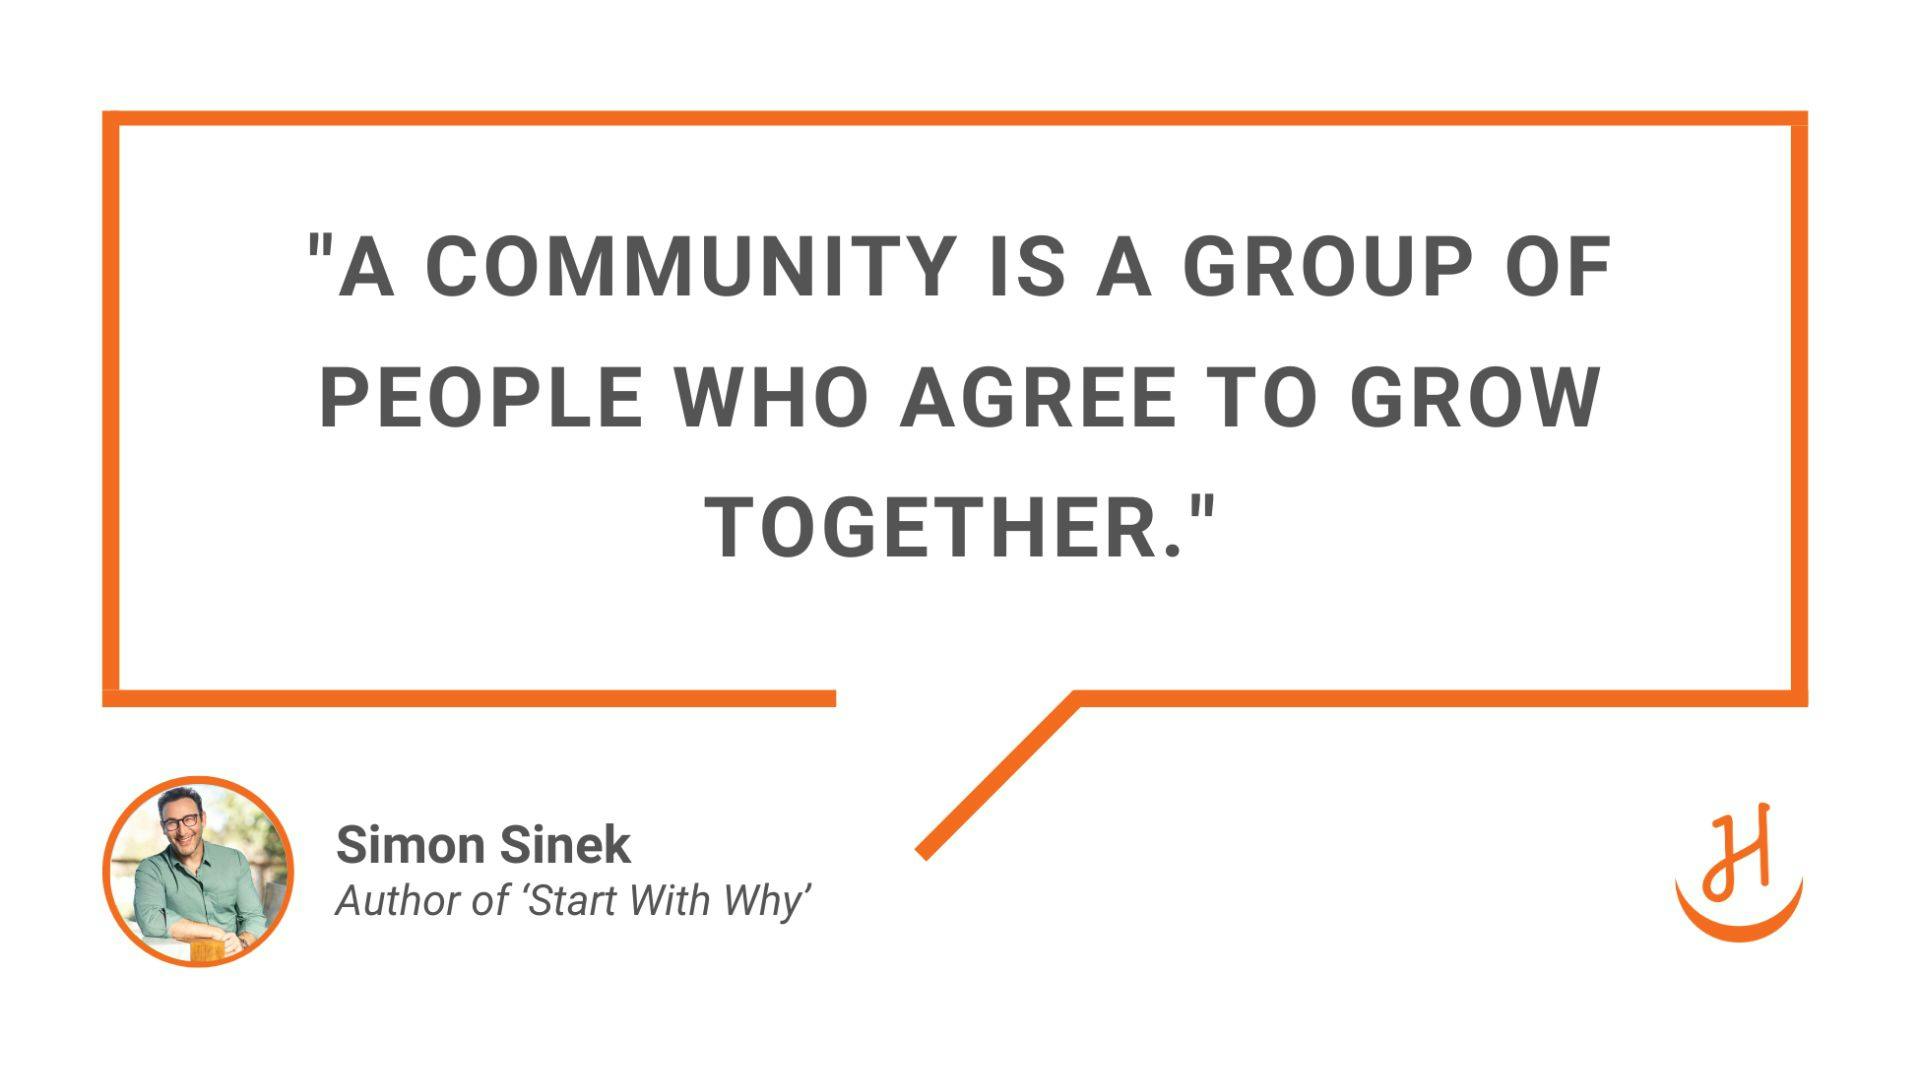 Pull-out quote: “A community is a group of people who agree to grow together.” Simon Sinek, bestselling author and speaker on leadership and company culture